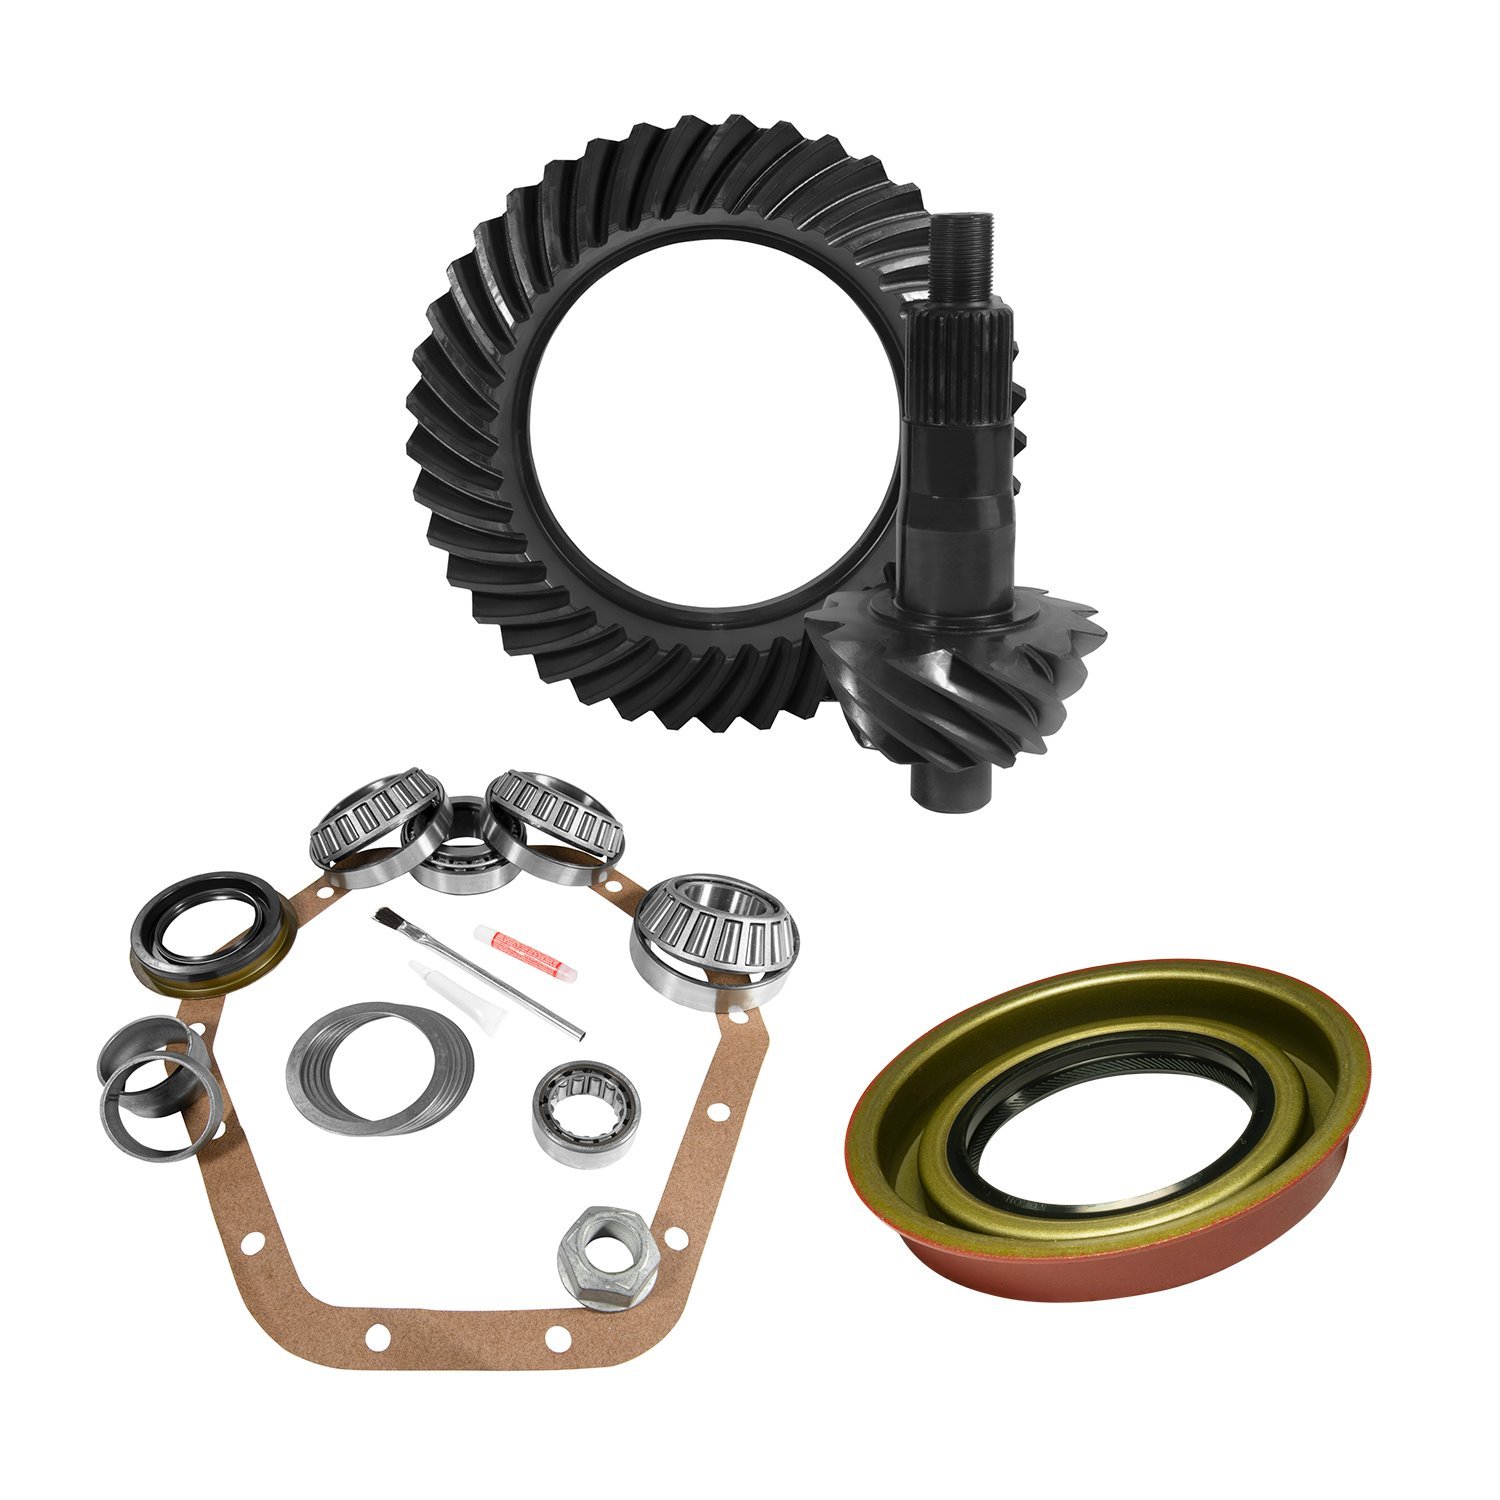 10.5 in. GM 14 Bolt, 5.13 Ratio Thick Rear Ring & Pinion Gear Set and Master Install Kit Package